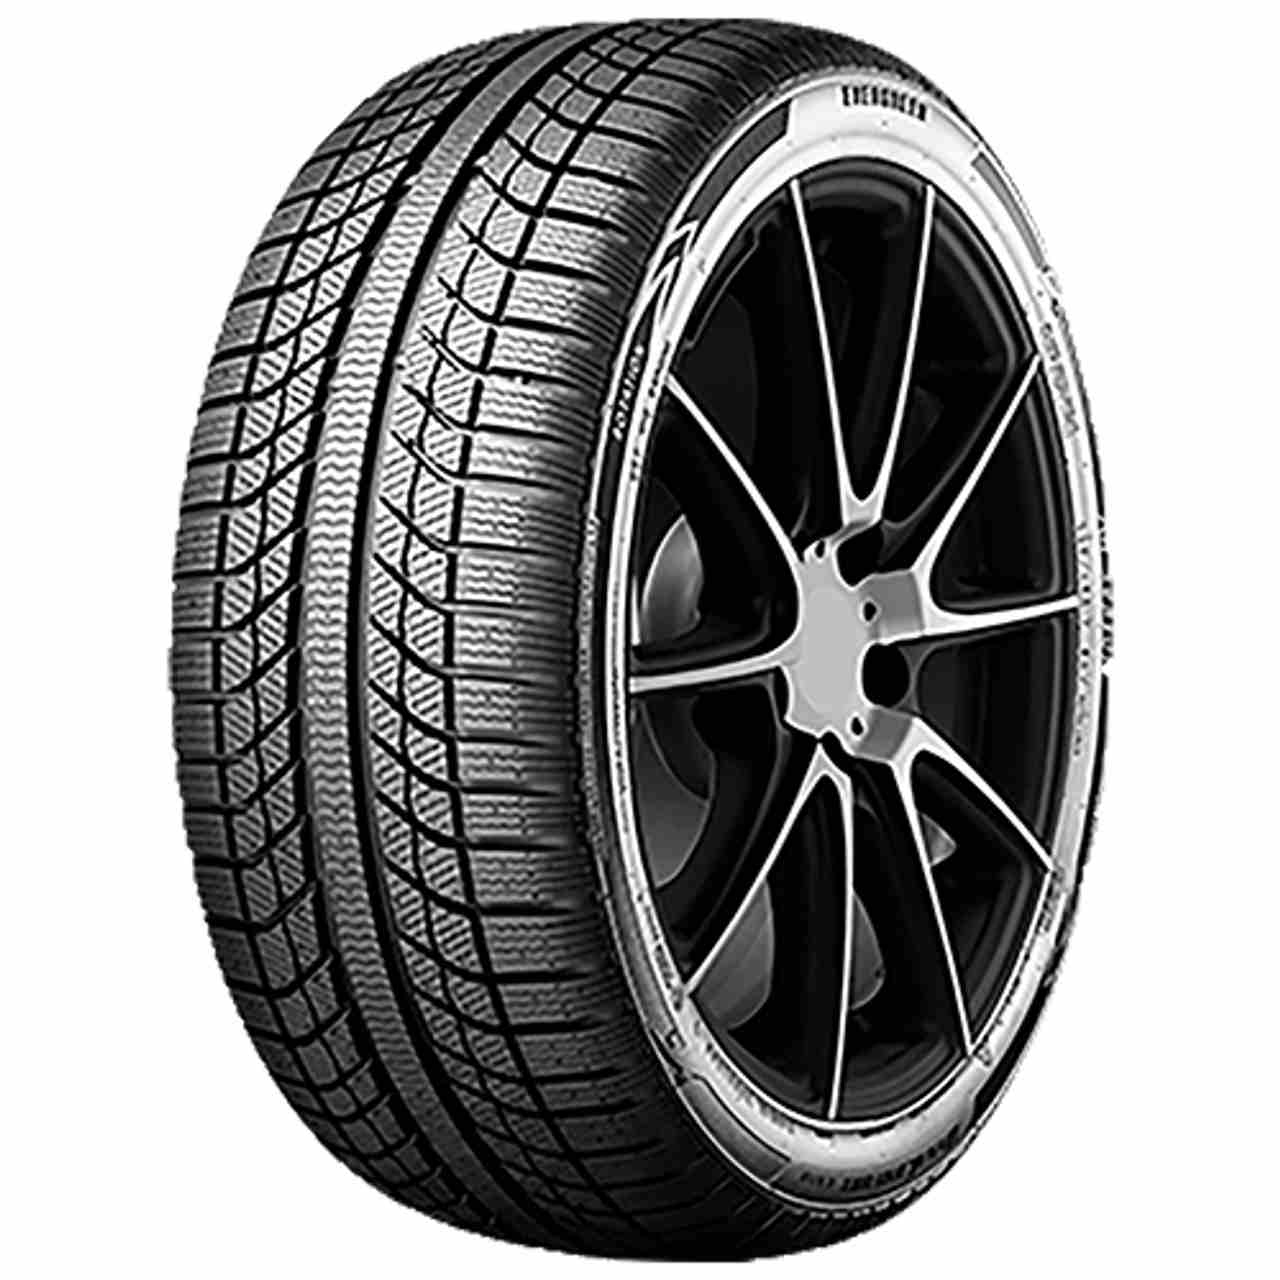 EVERGREEN DYNACOMFORT EA719 185/65R15 88H BSW